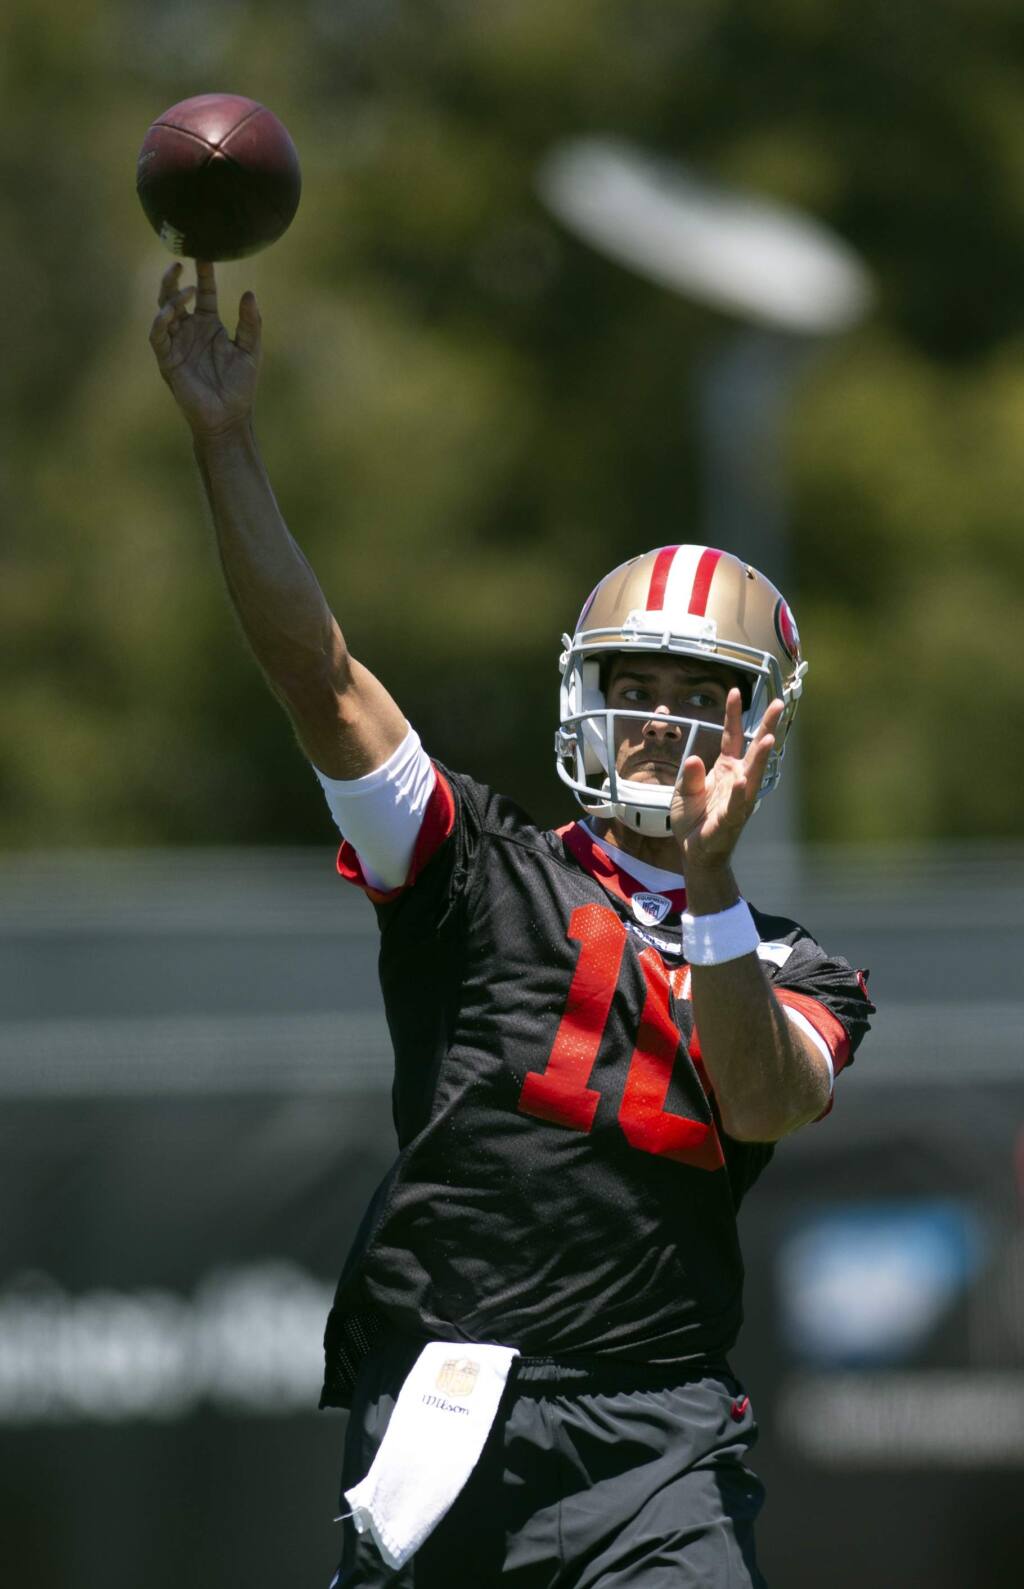 San Francisco 49ers quarterback Jimmy Garoppolo (10) throws a pass during NFL football practice at the team's headquarters in Santa Clara, Calif., Tuesday, June 12, 2018. (AP Photo/D. Ross Cameron)